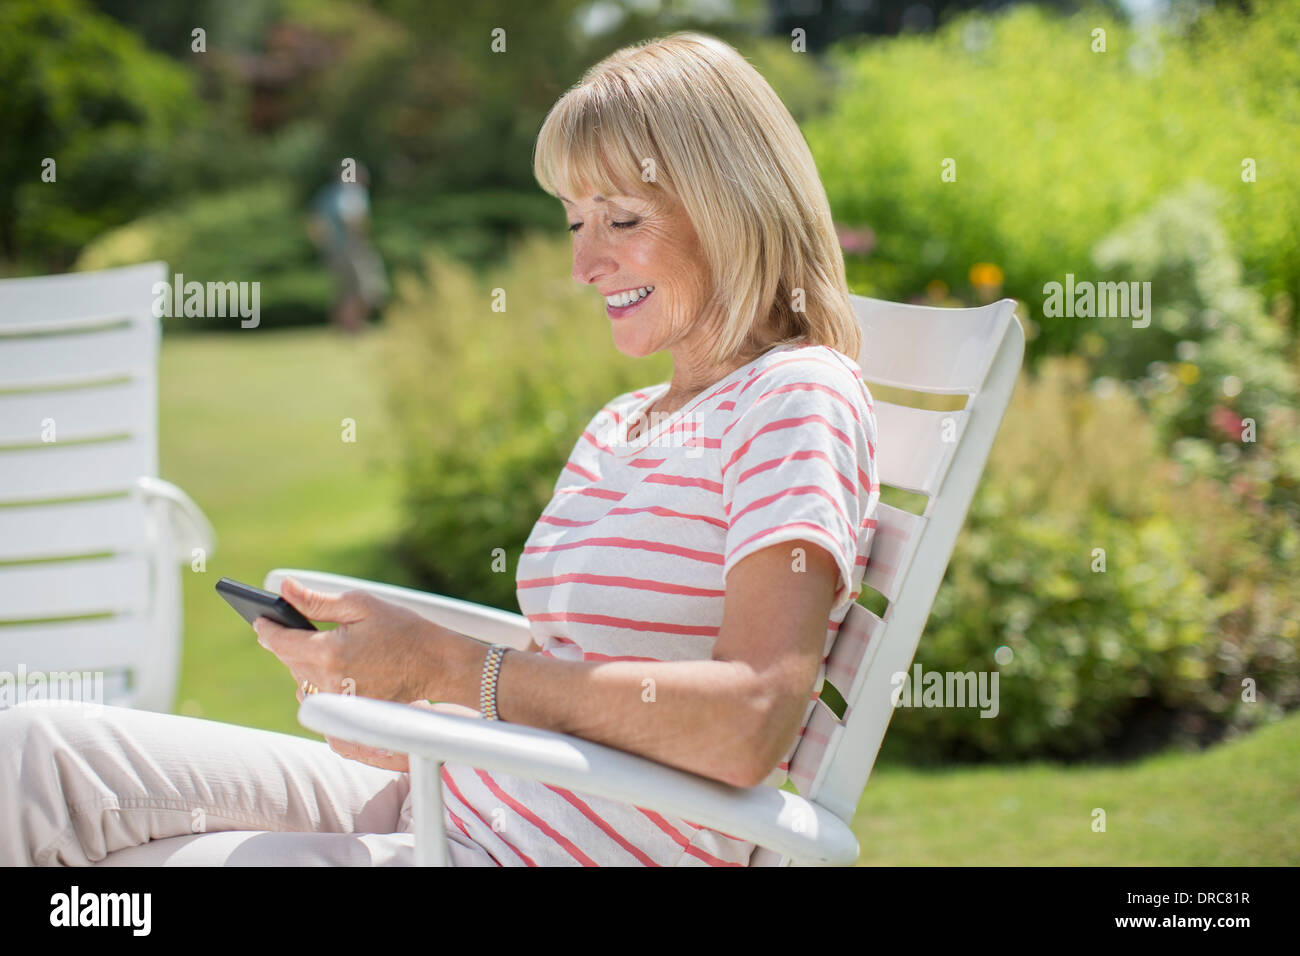 Woman using cell phone in garden Stock Photo